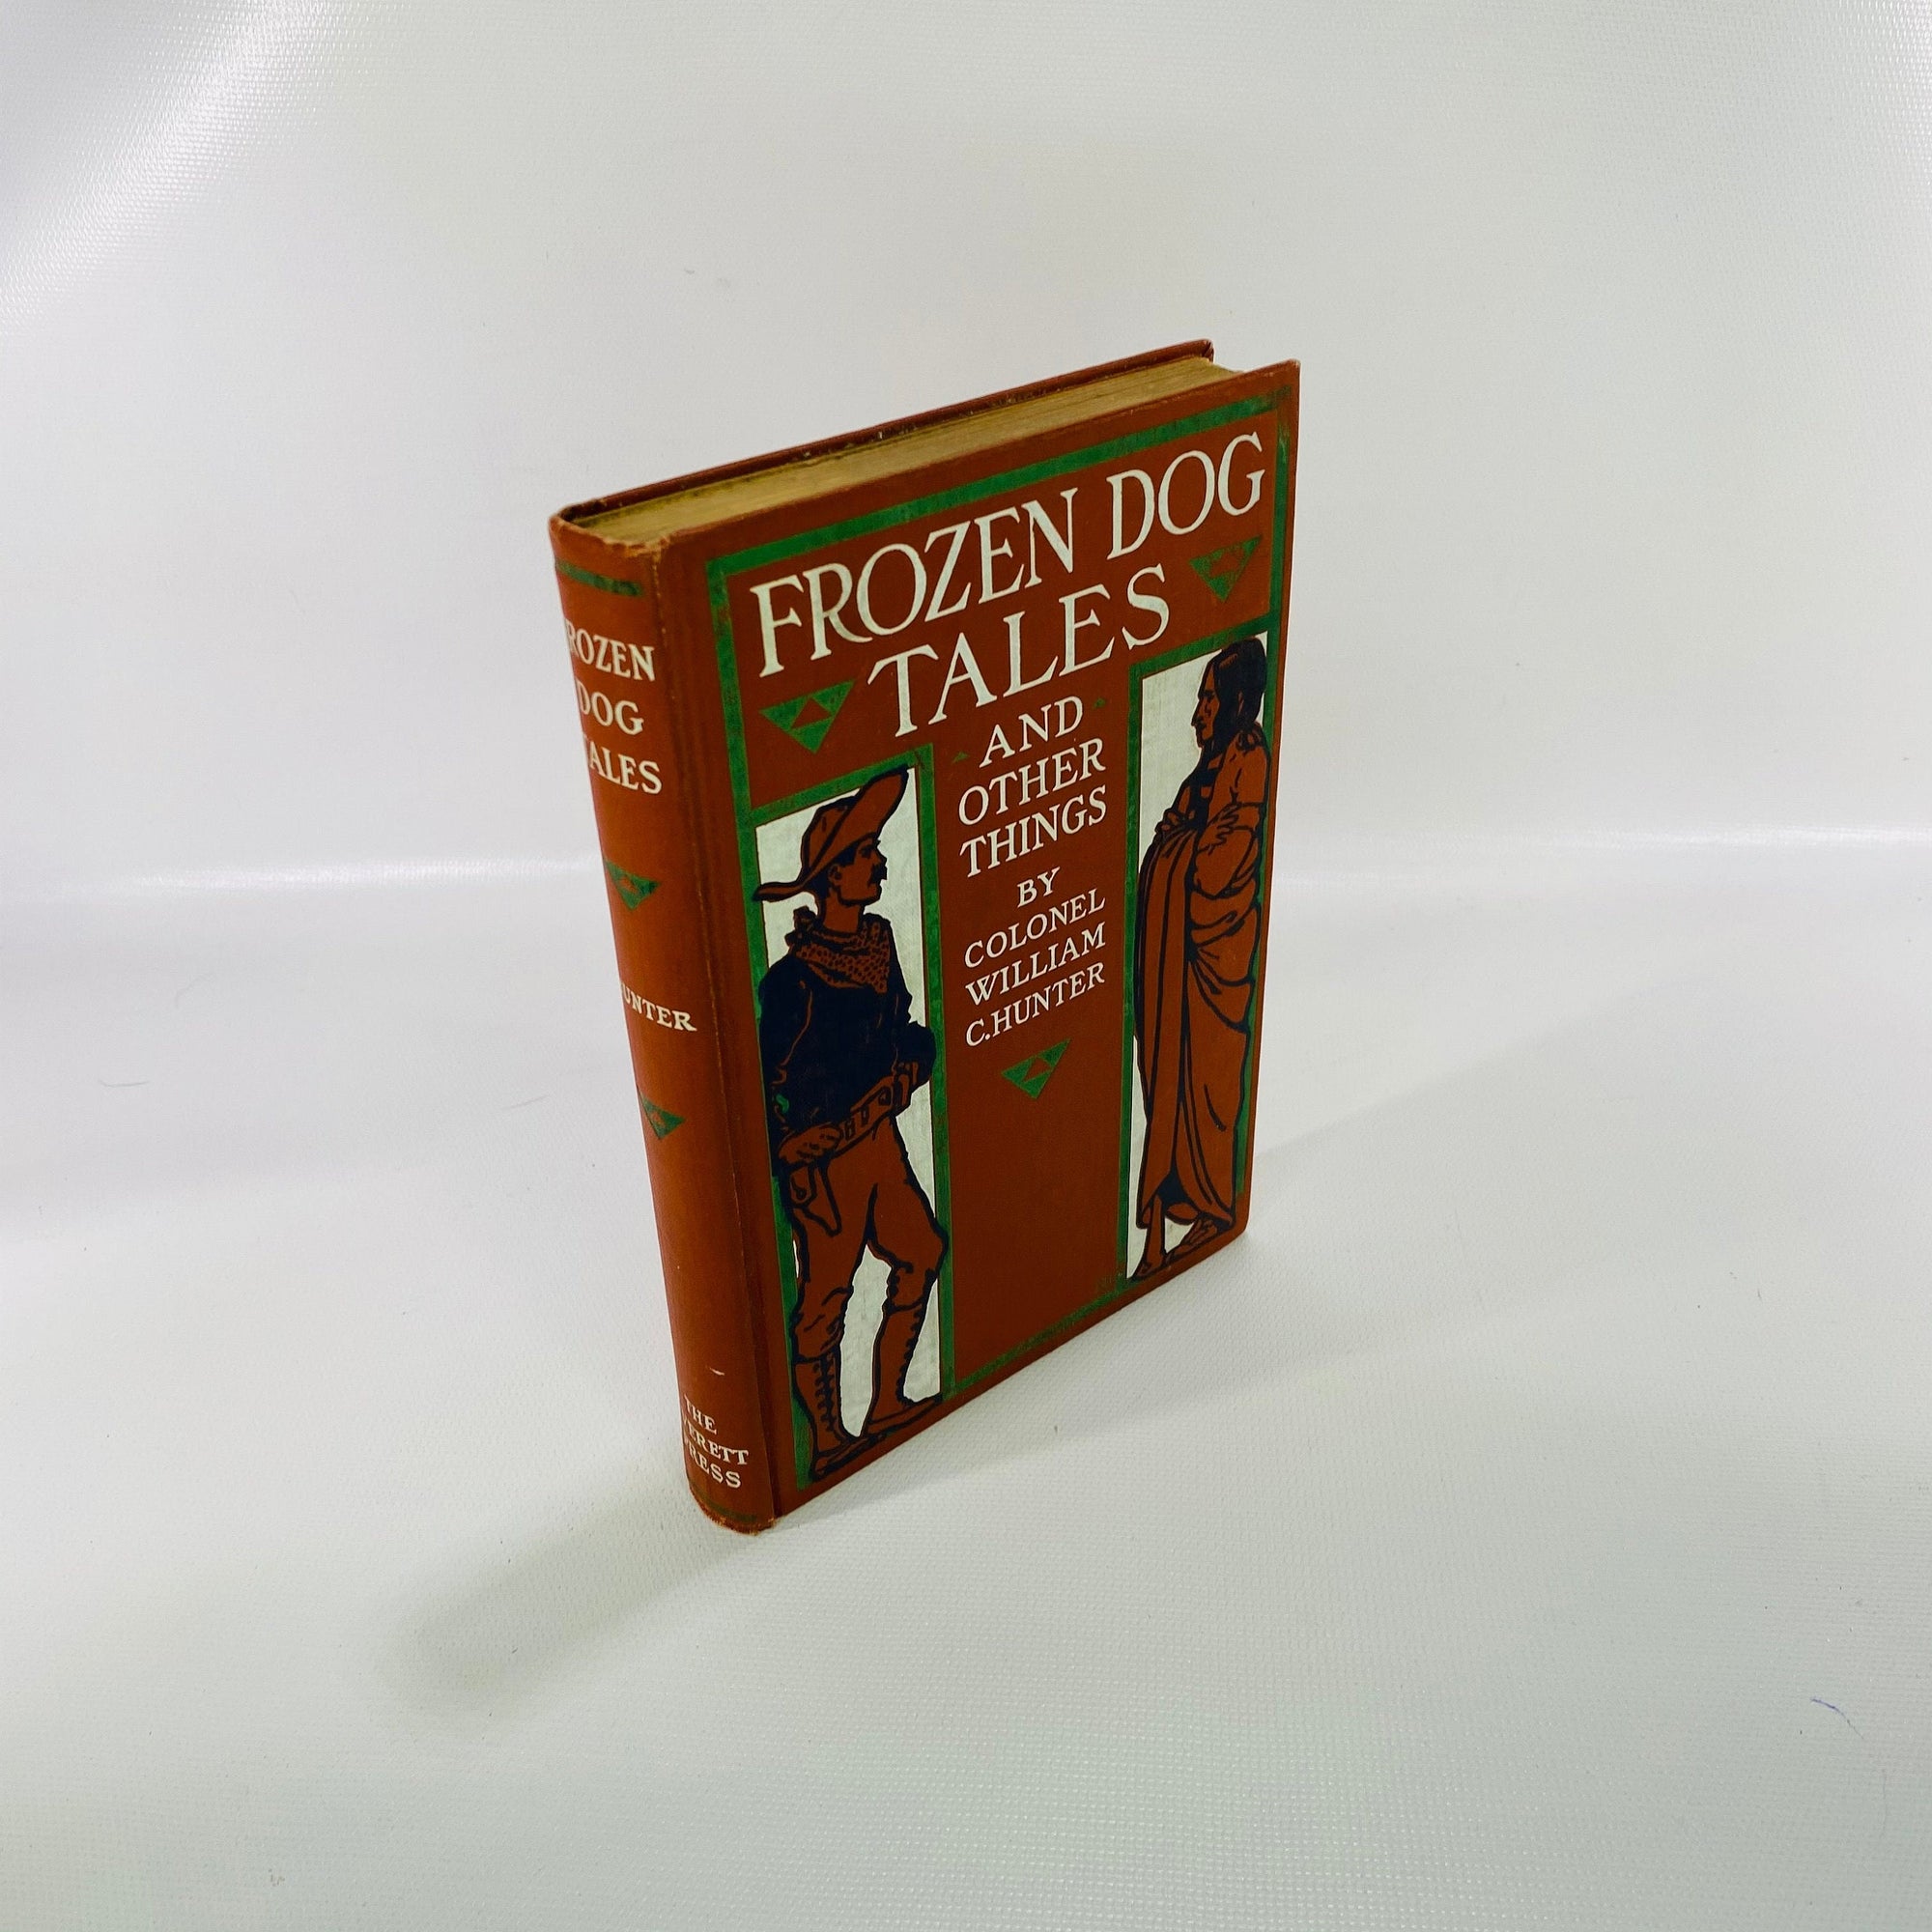 Frozen Dog Tales and other Things by Colonel Wm C Hunter 1905 The Everett Press Co. Vintage Book